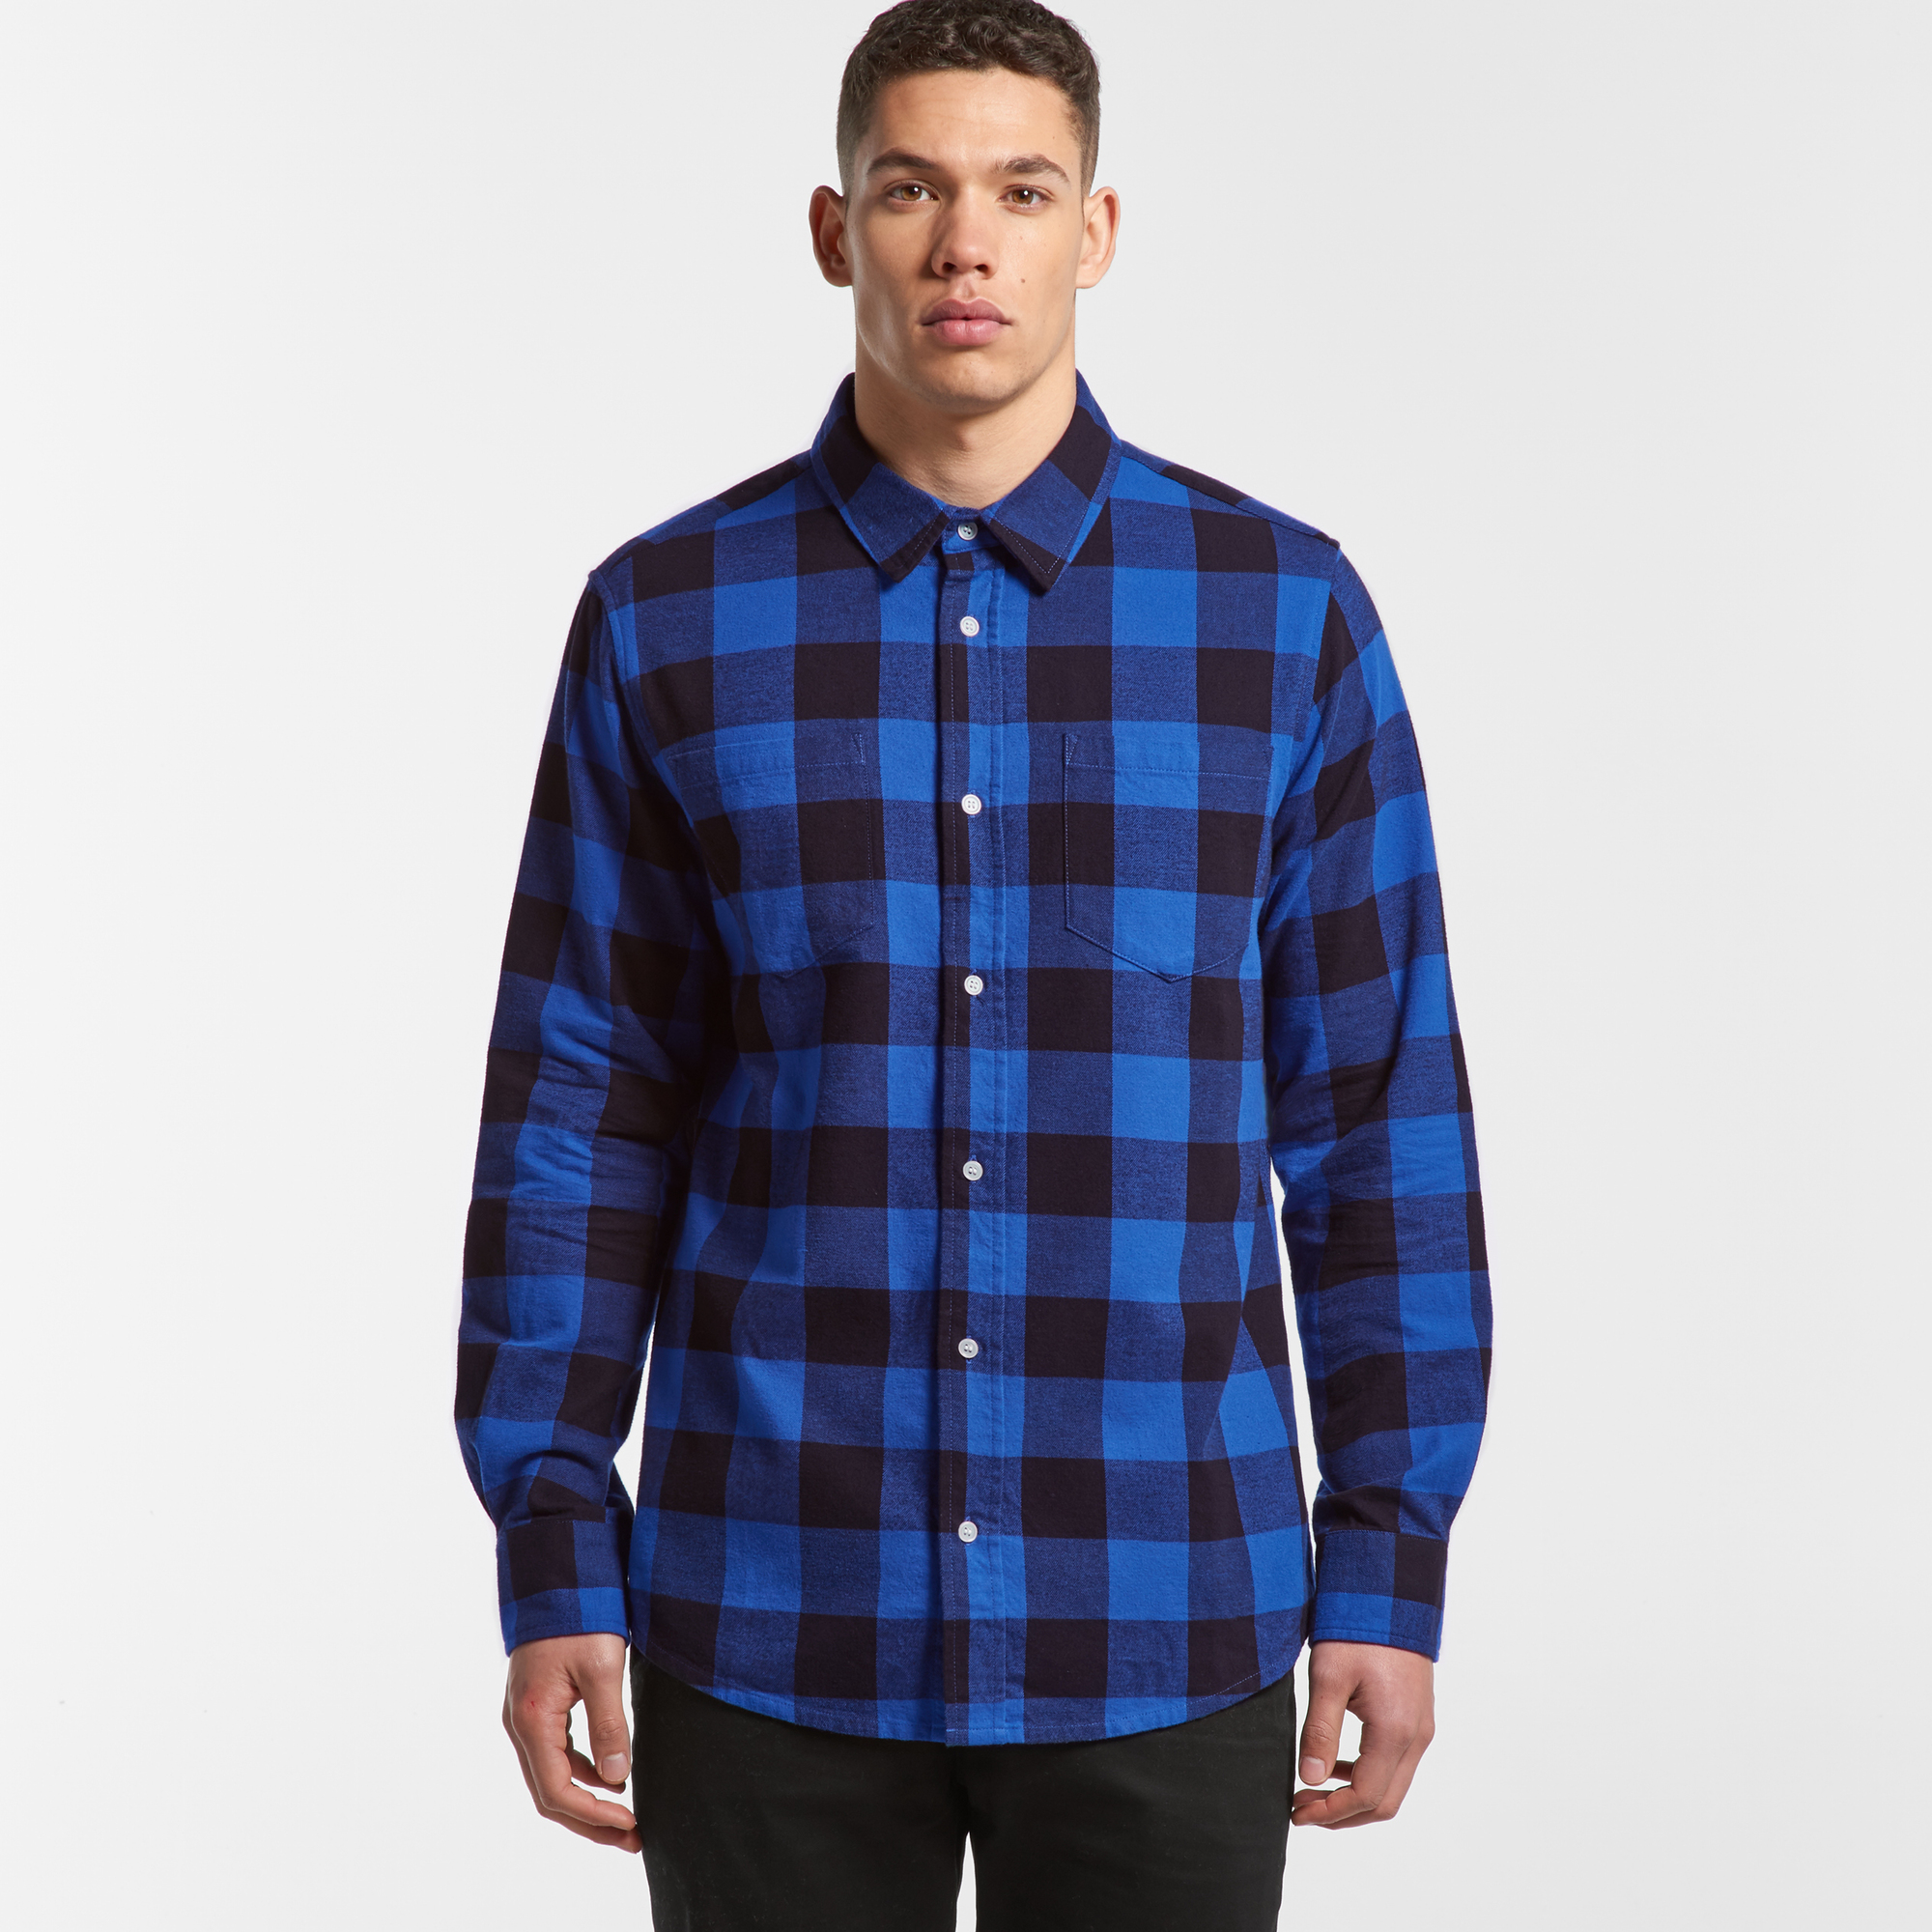 Men's Check Shirt | Branded Check Shirt | Printed Check Shirt NZ | AS Colour | Withers & Co